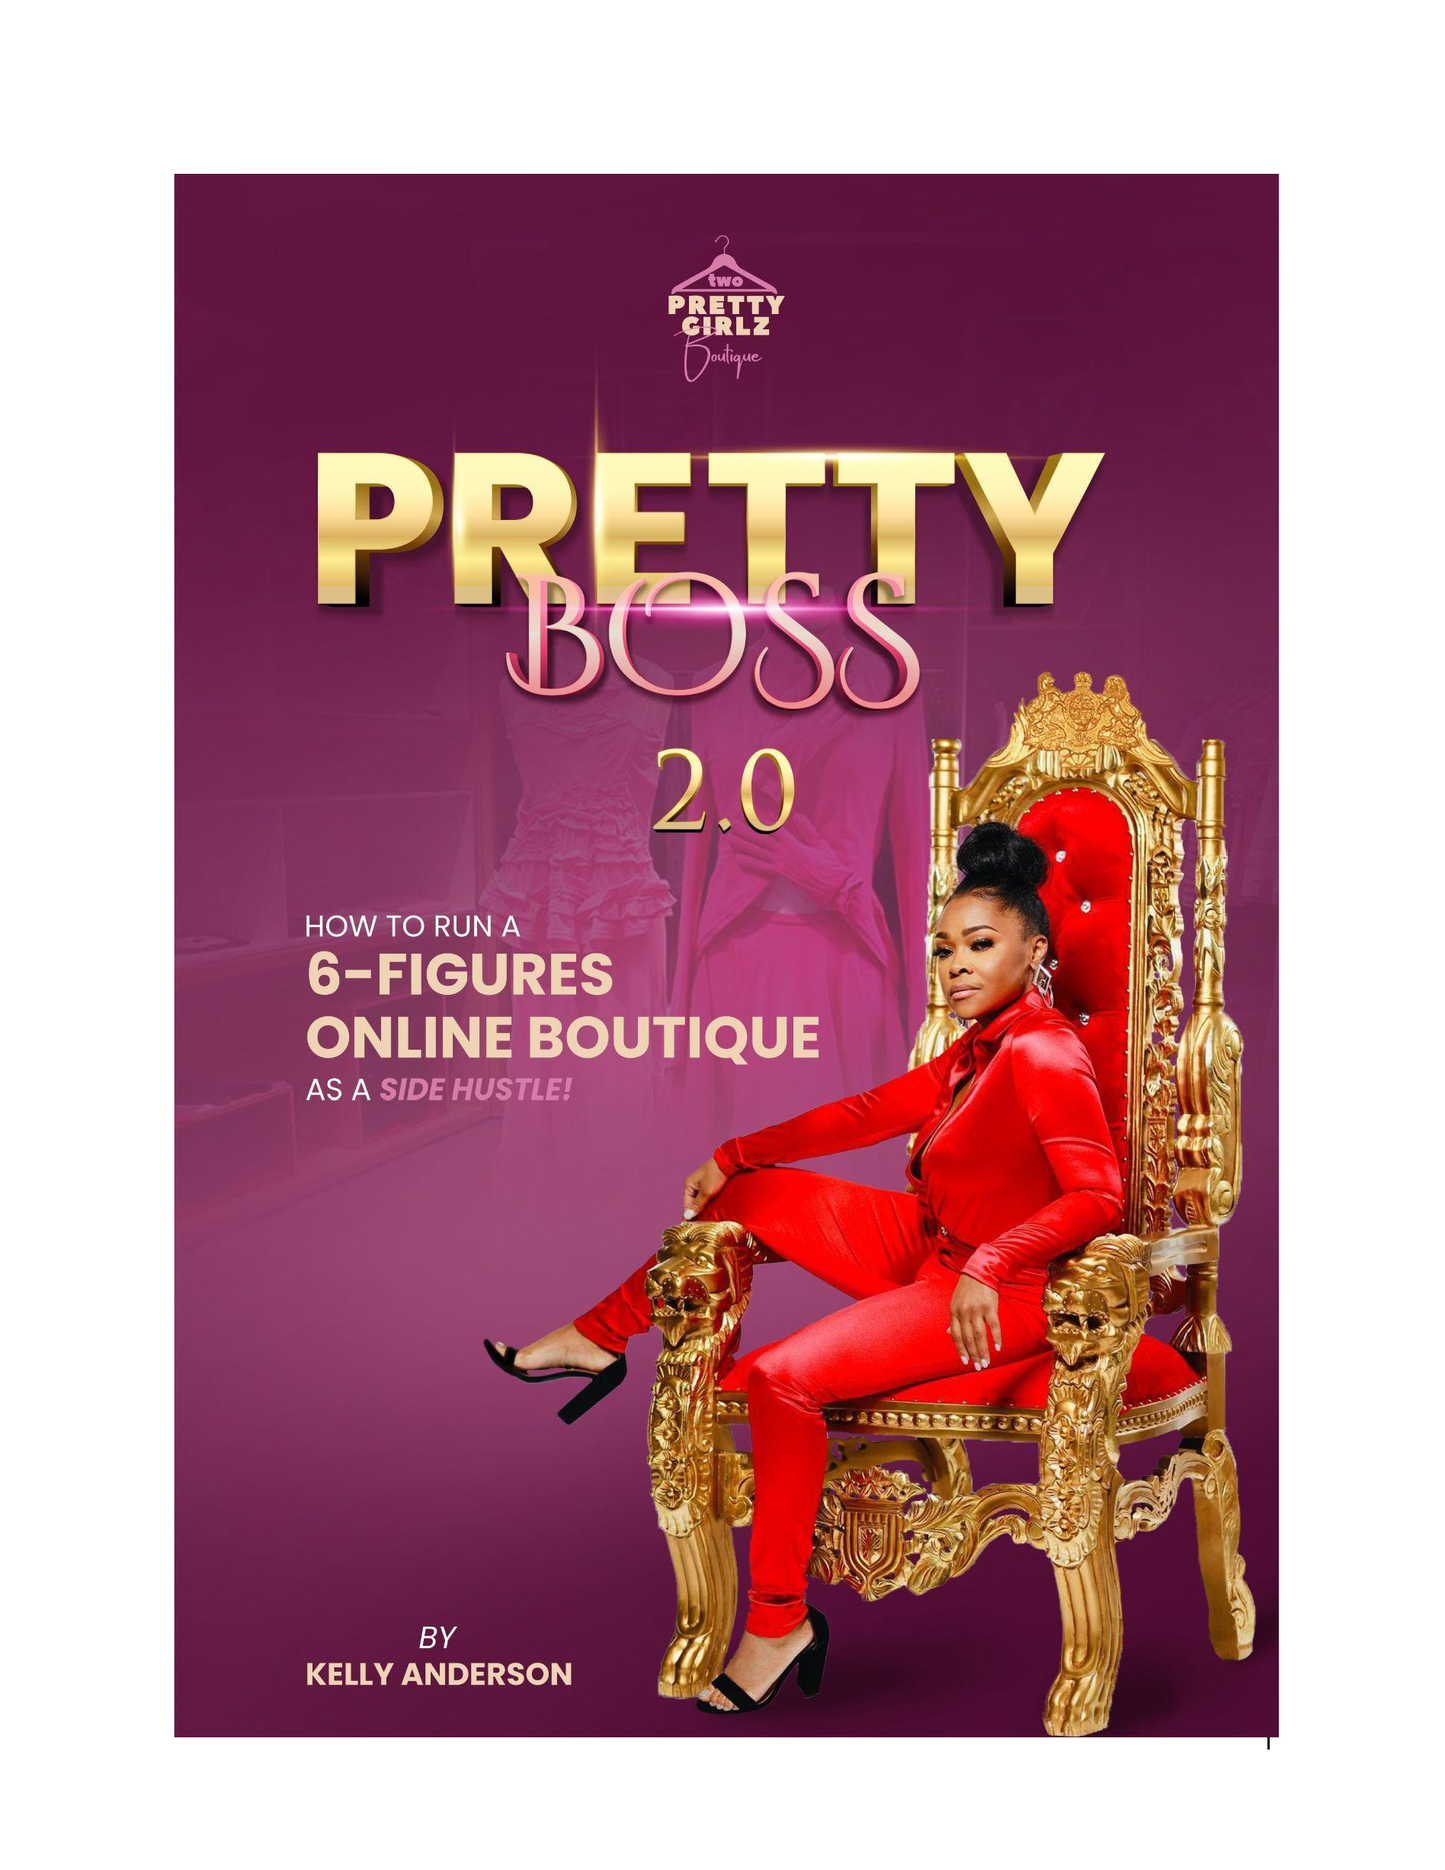 E-Book - Pretty Boss 2.0: How To Run a Six-Figures Online Boutique As A Side Hustle!